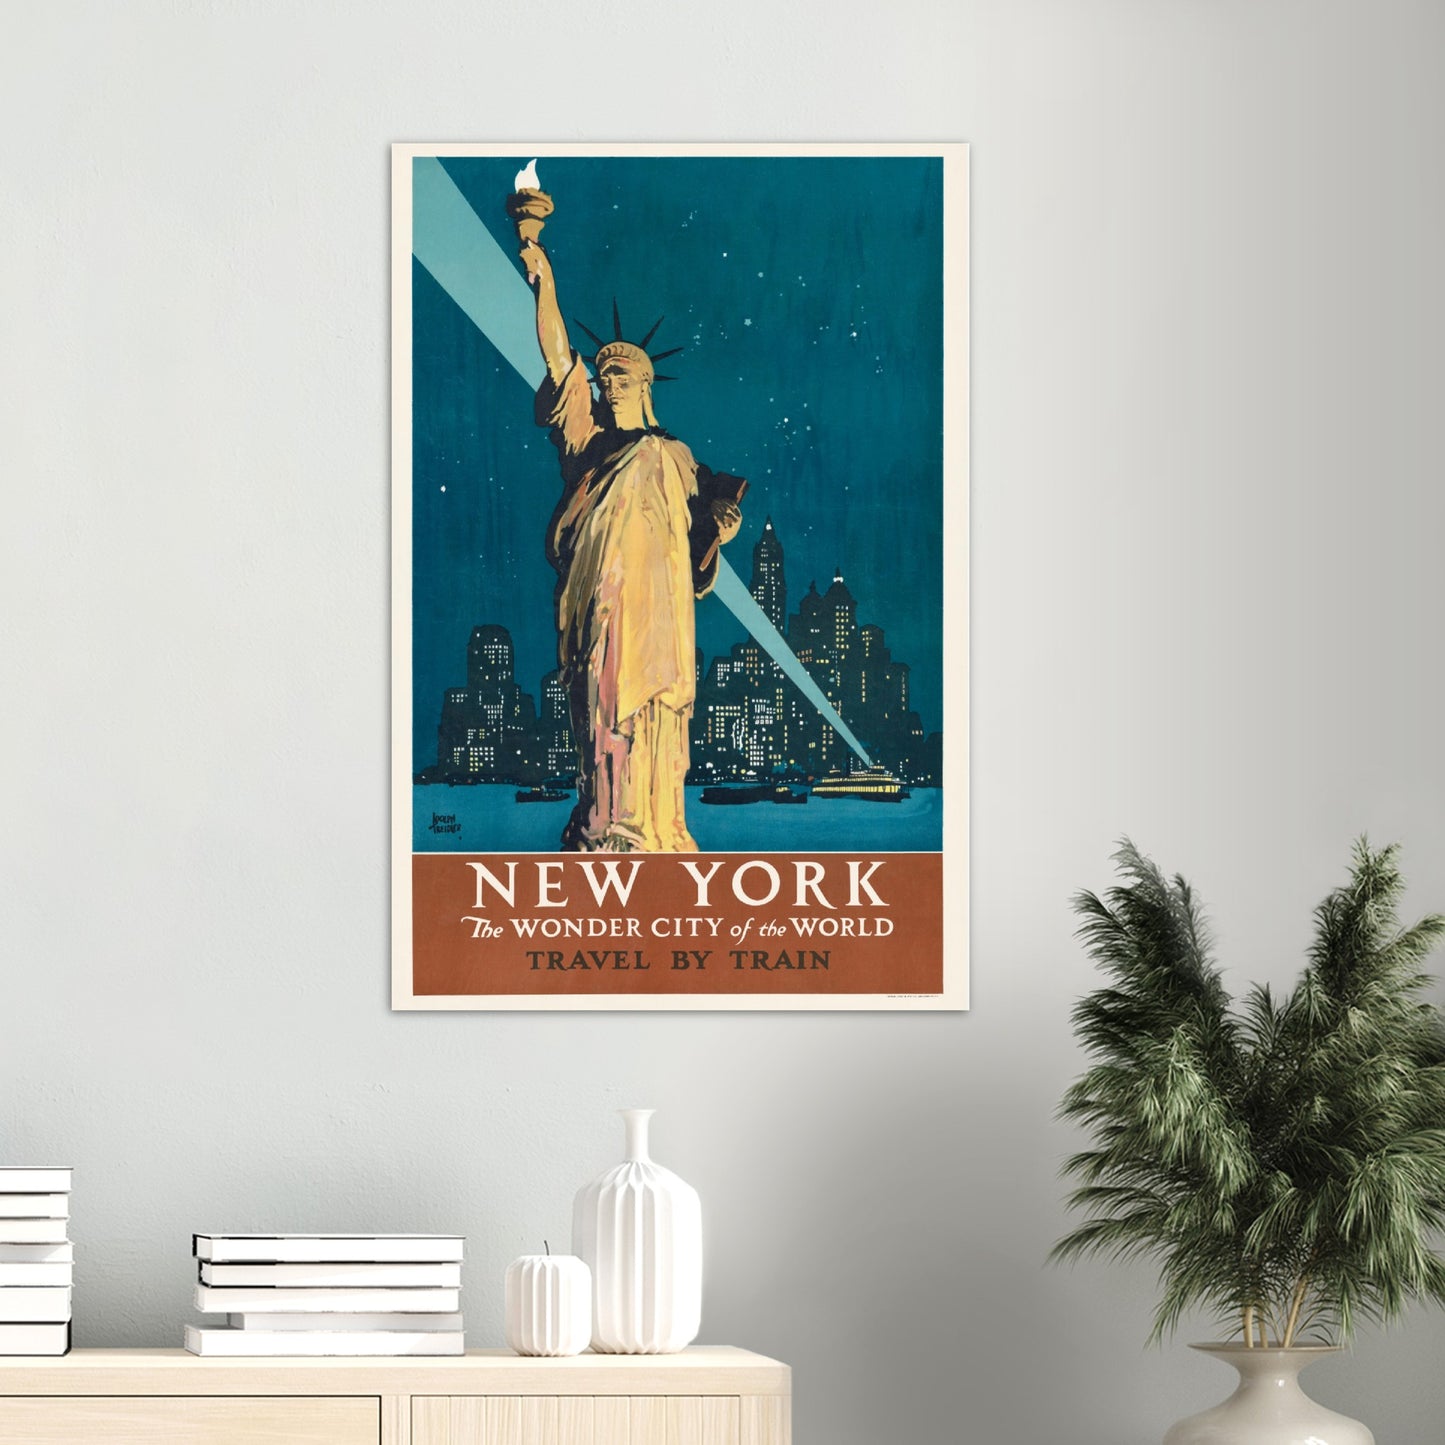 Poster - New York The Wonder City Of The World Travel By Train (1927) Premium Matte Poster Paper